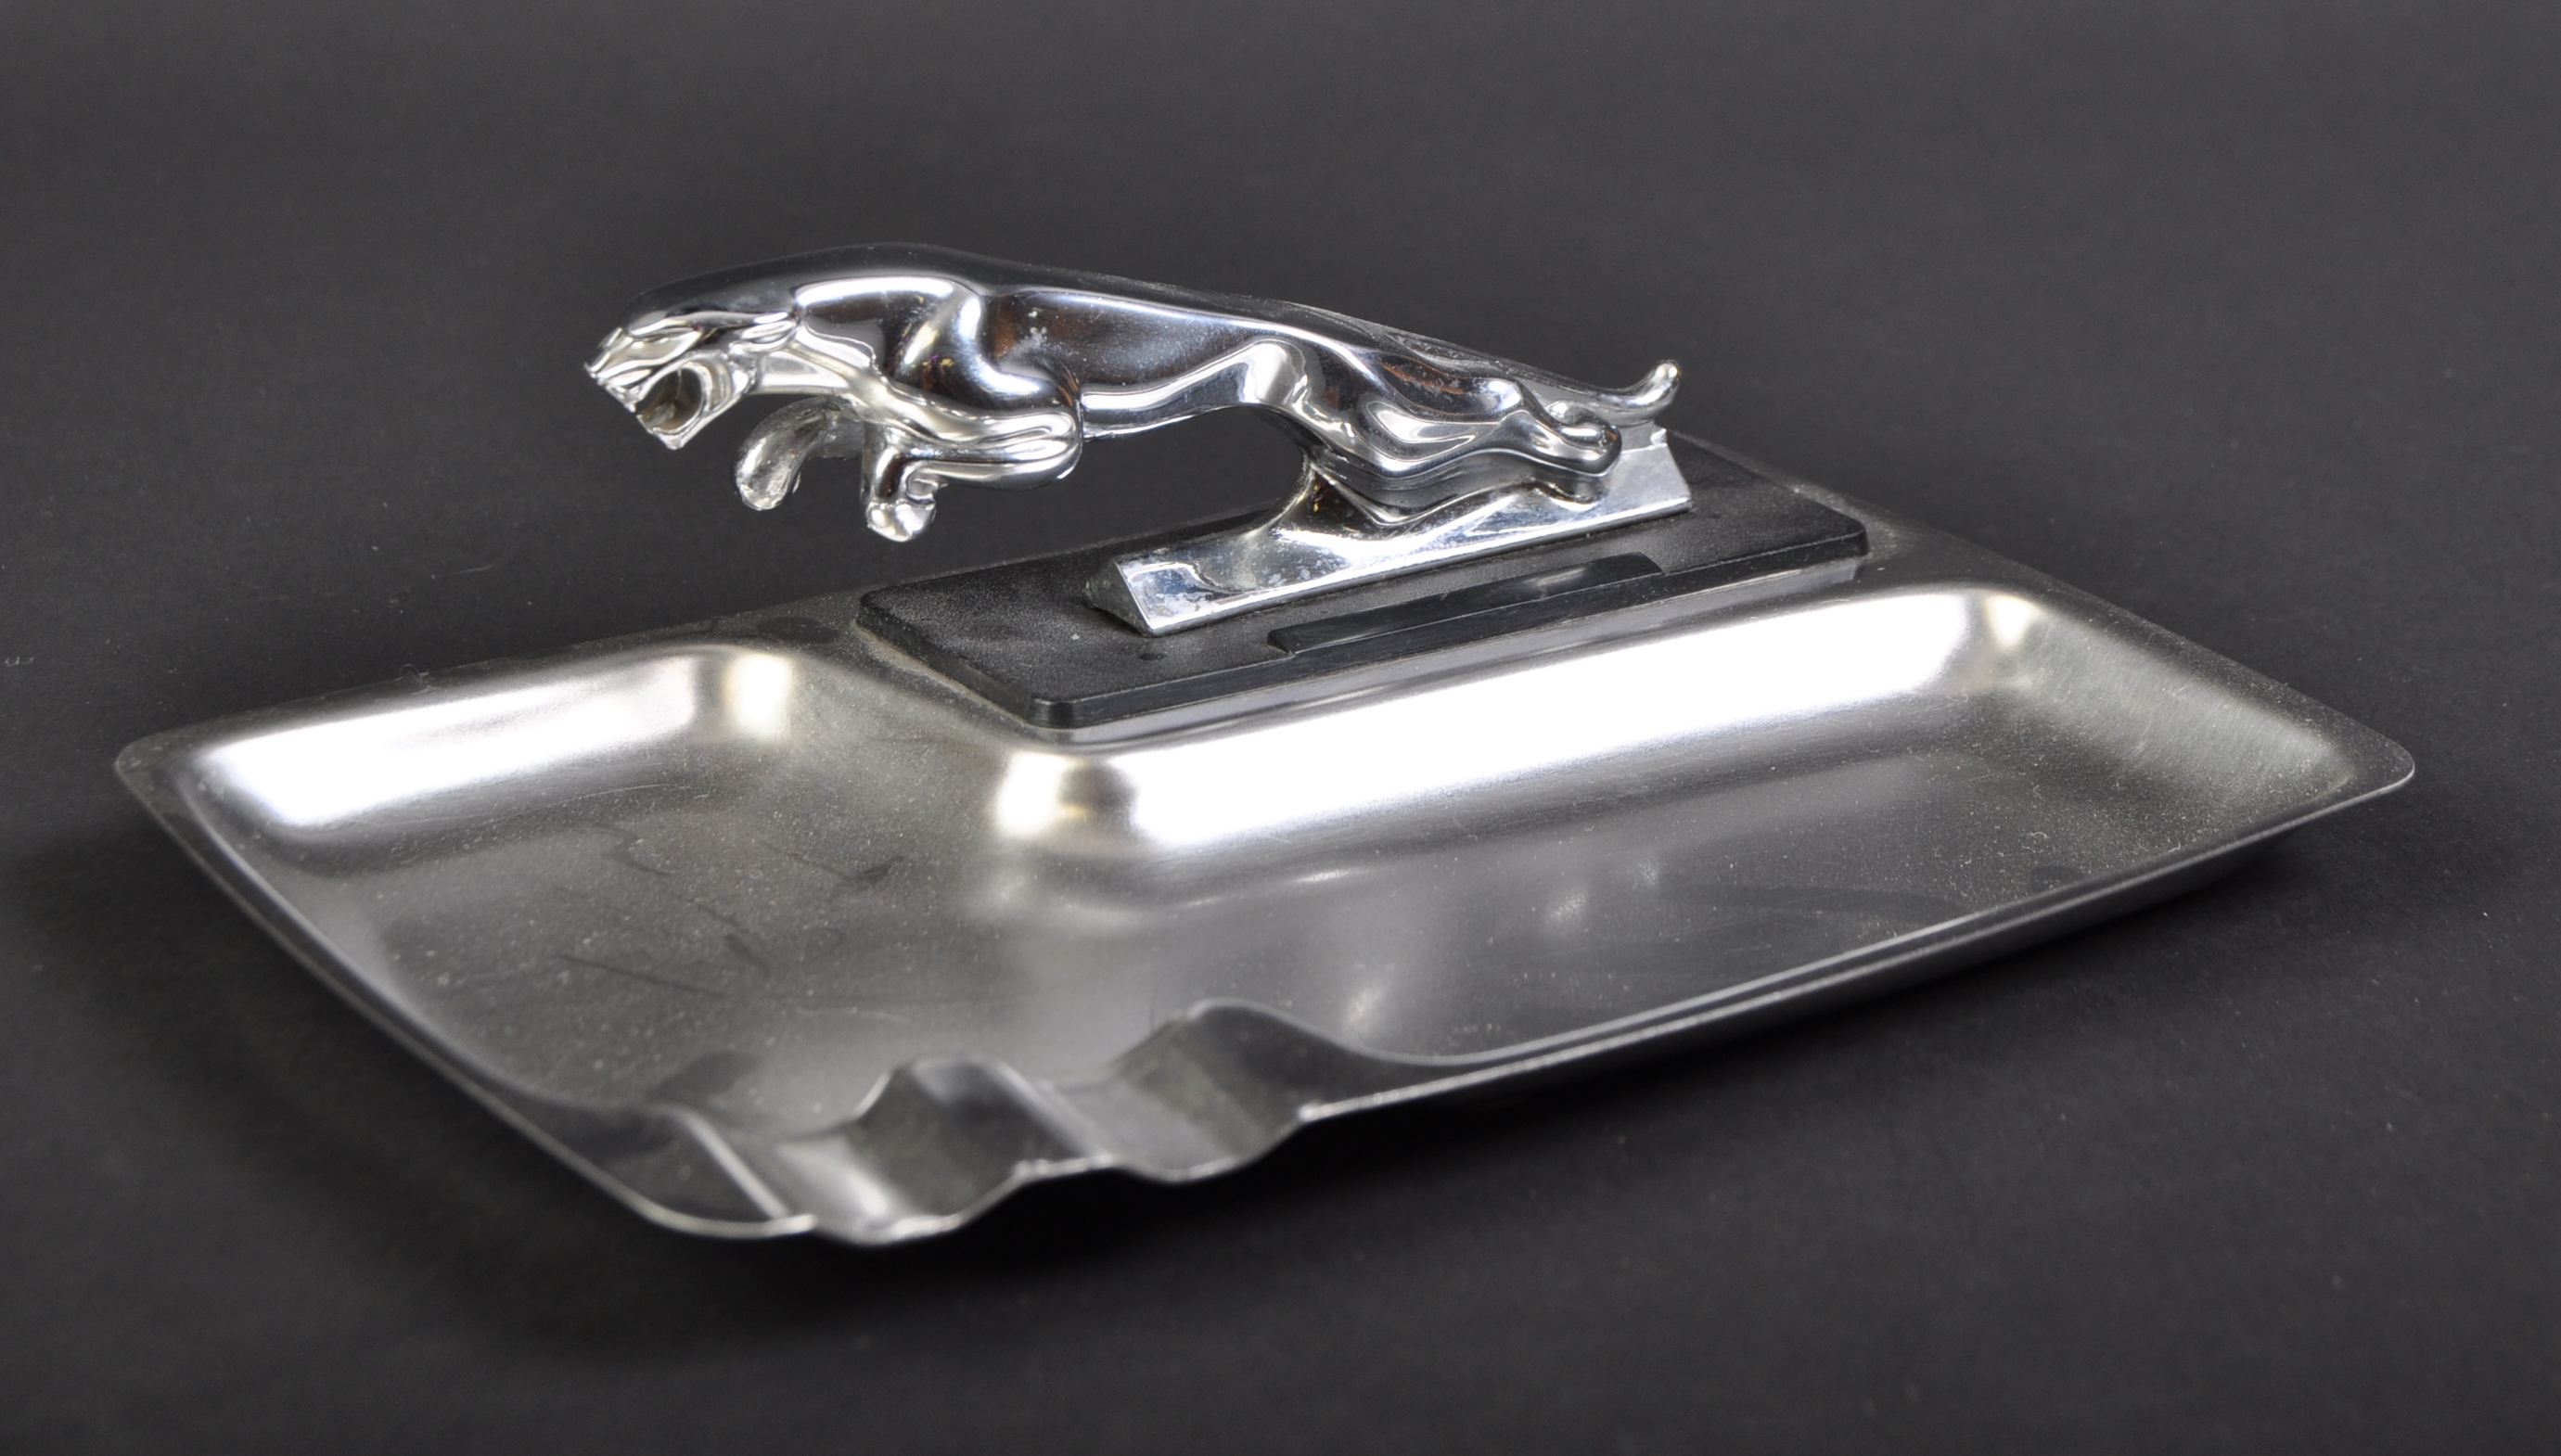 JAGUAR - STAINLESS STEEL ASHTRAY WITH LEAPER MASCOT